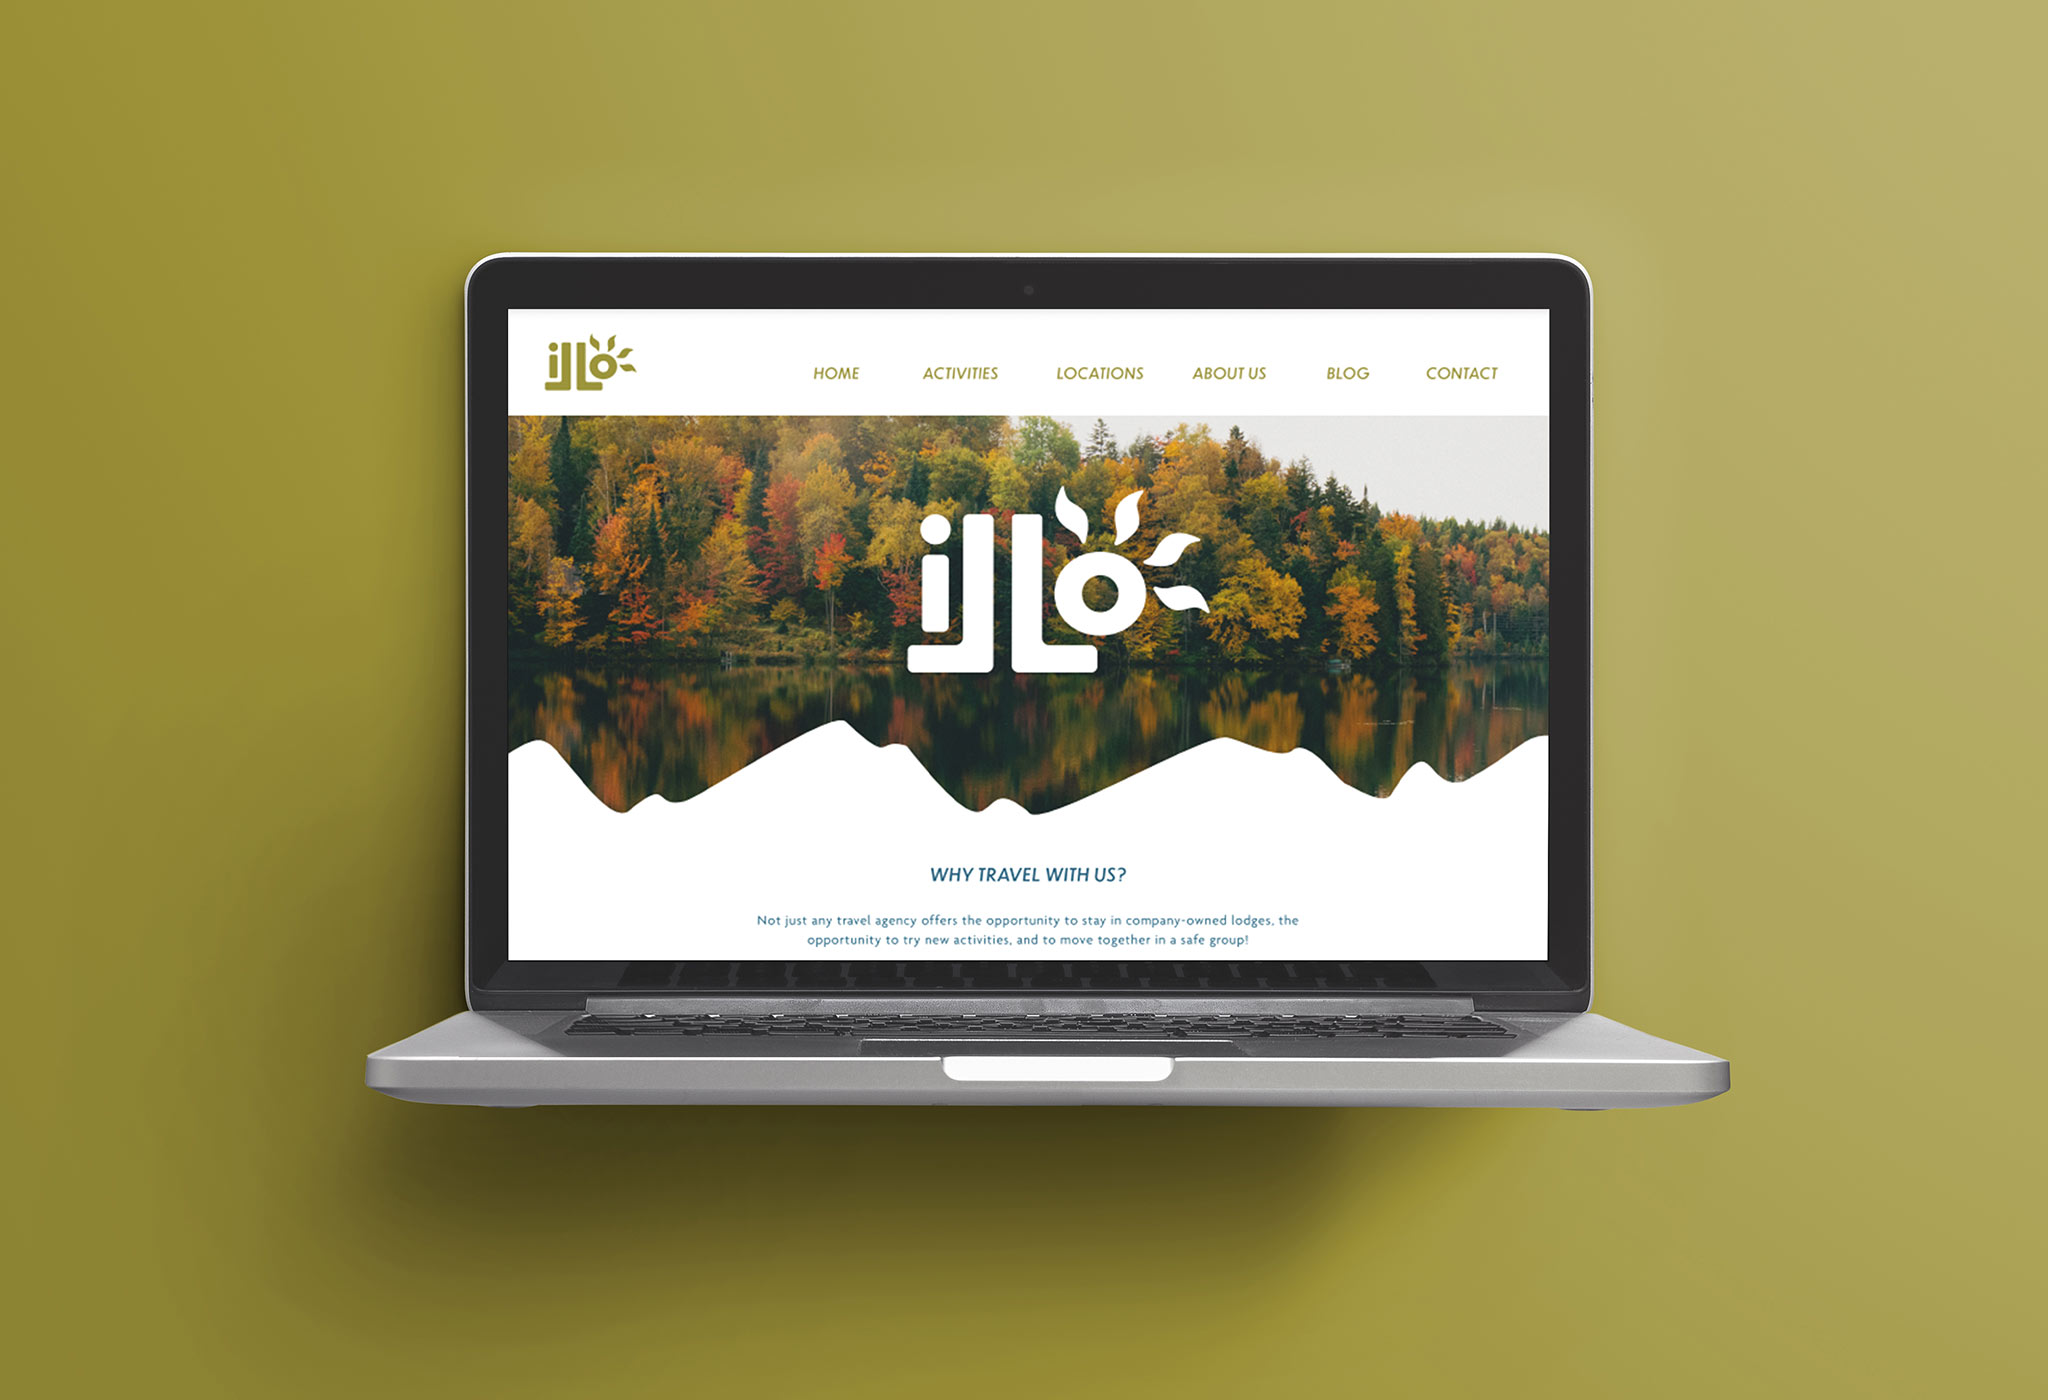 Laptop mockup displaying the web home page of a hypothetical brand "Illo" which is a travel agency.